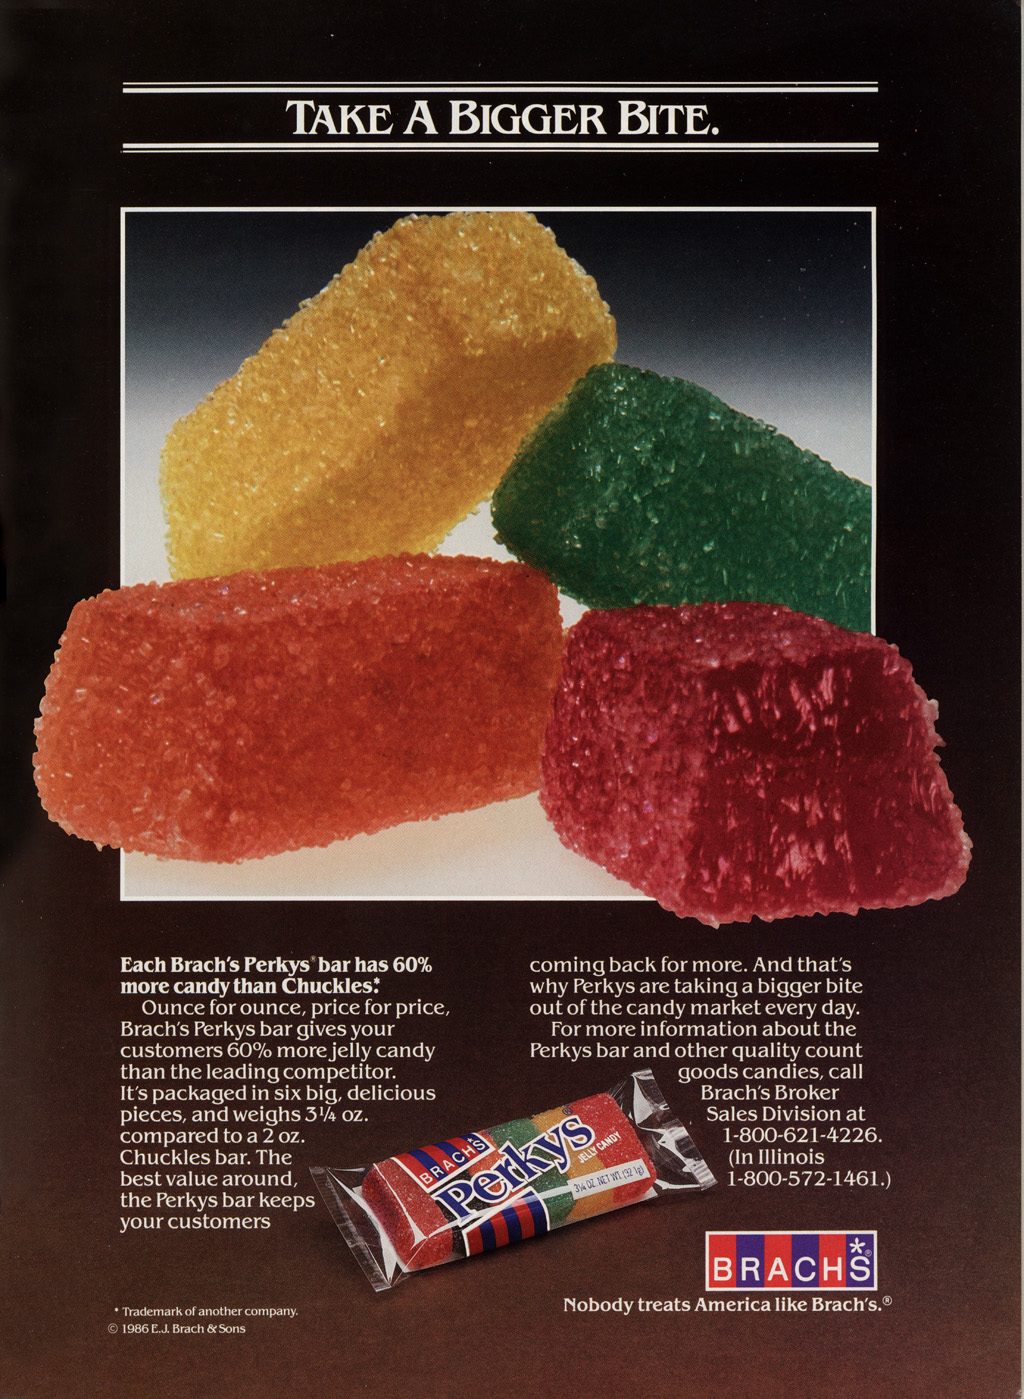 Brach's candy was the best - Growing Up In The 70s and 80s